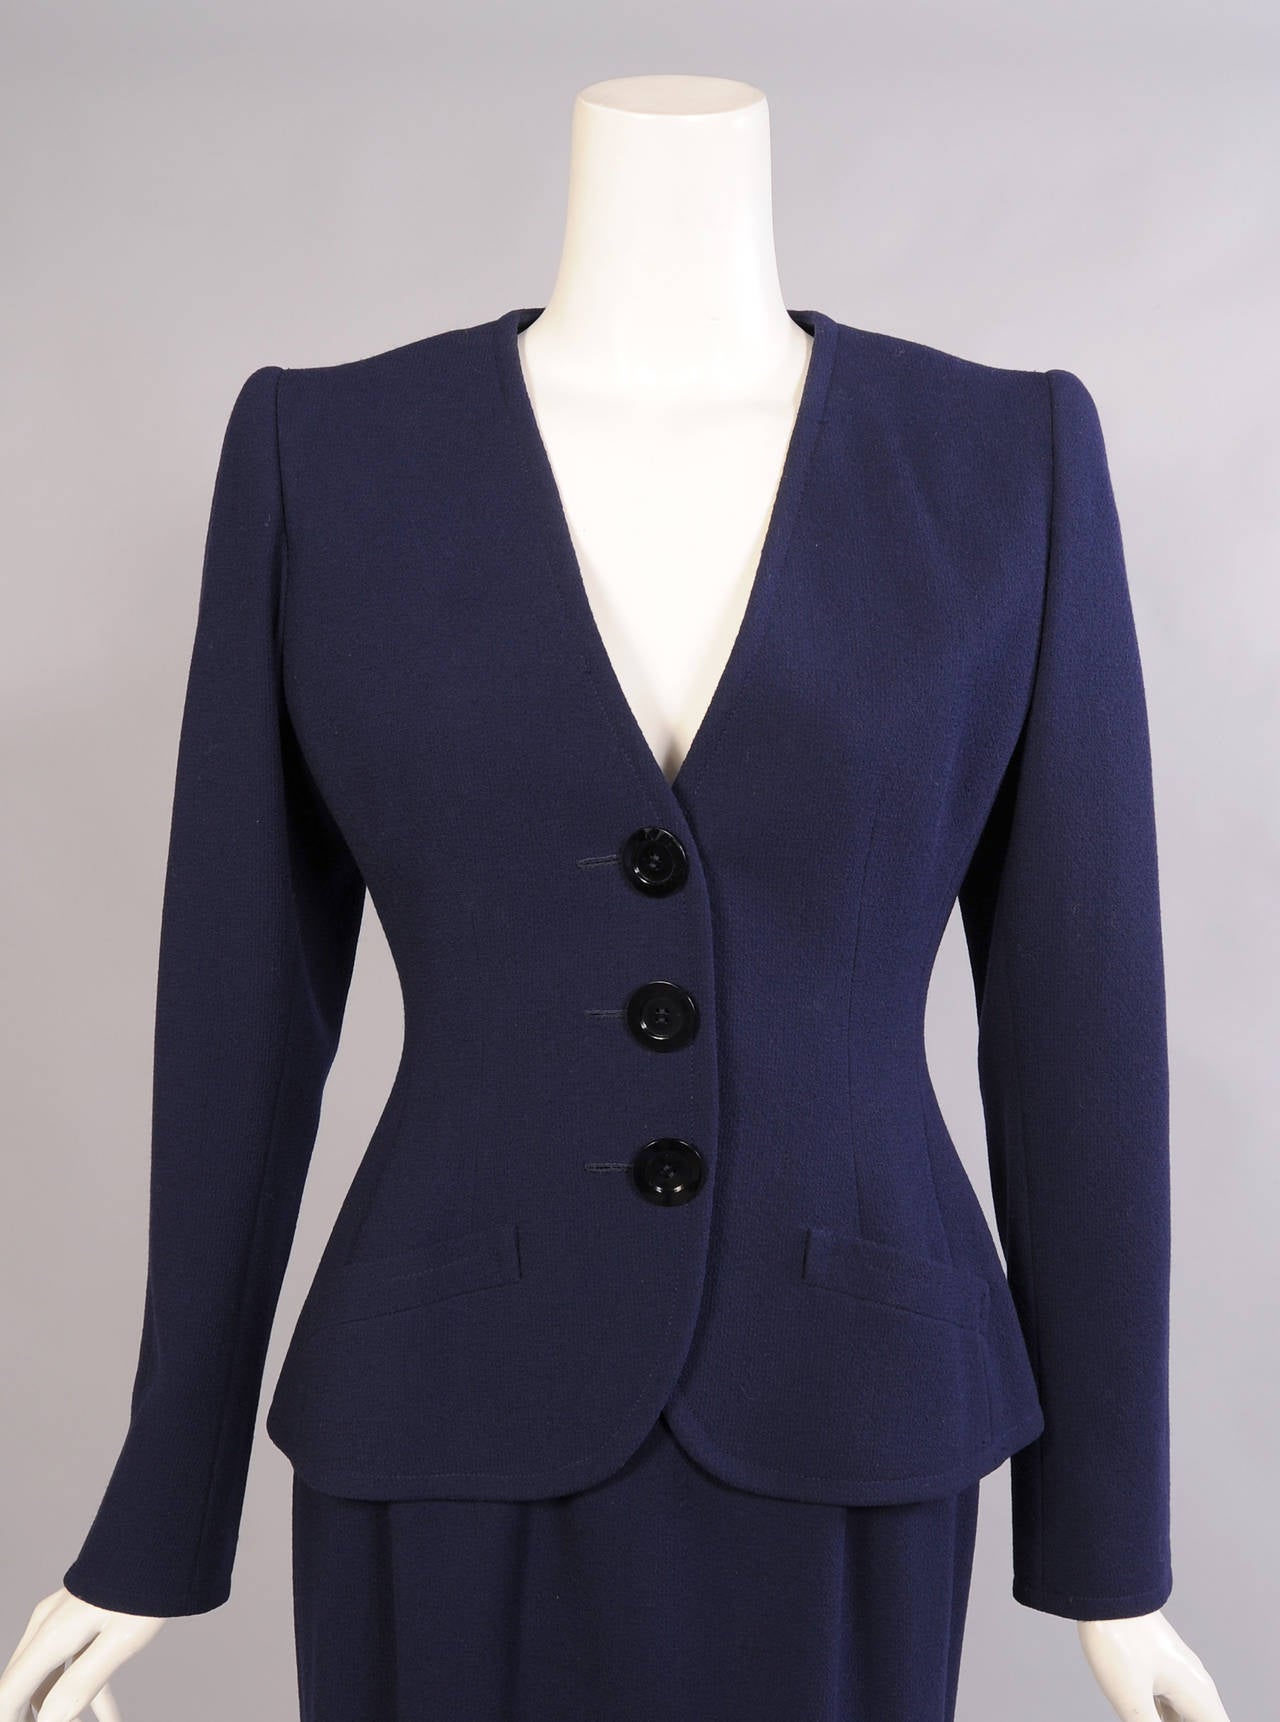 Yves Saint Laurent Huate Couture Navy Wool Suit For Sale at 1stdibs